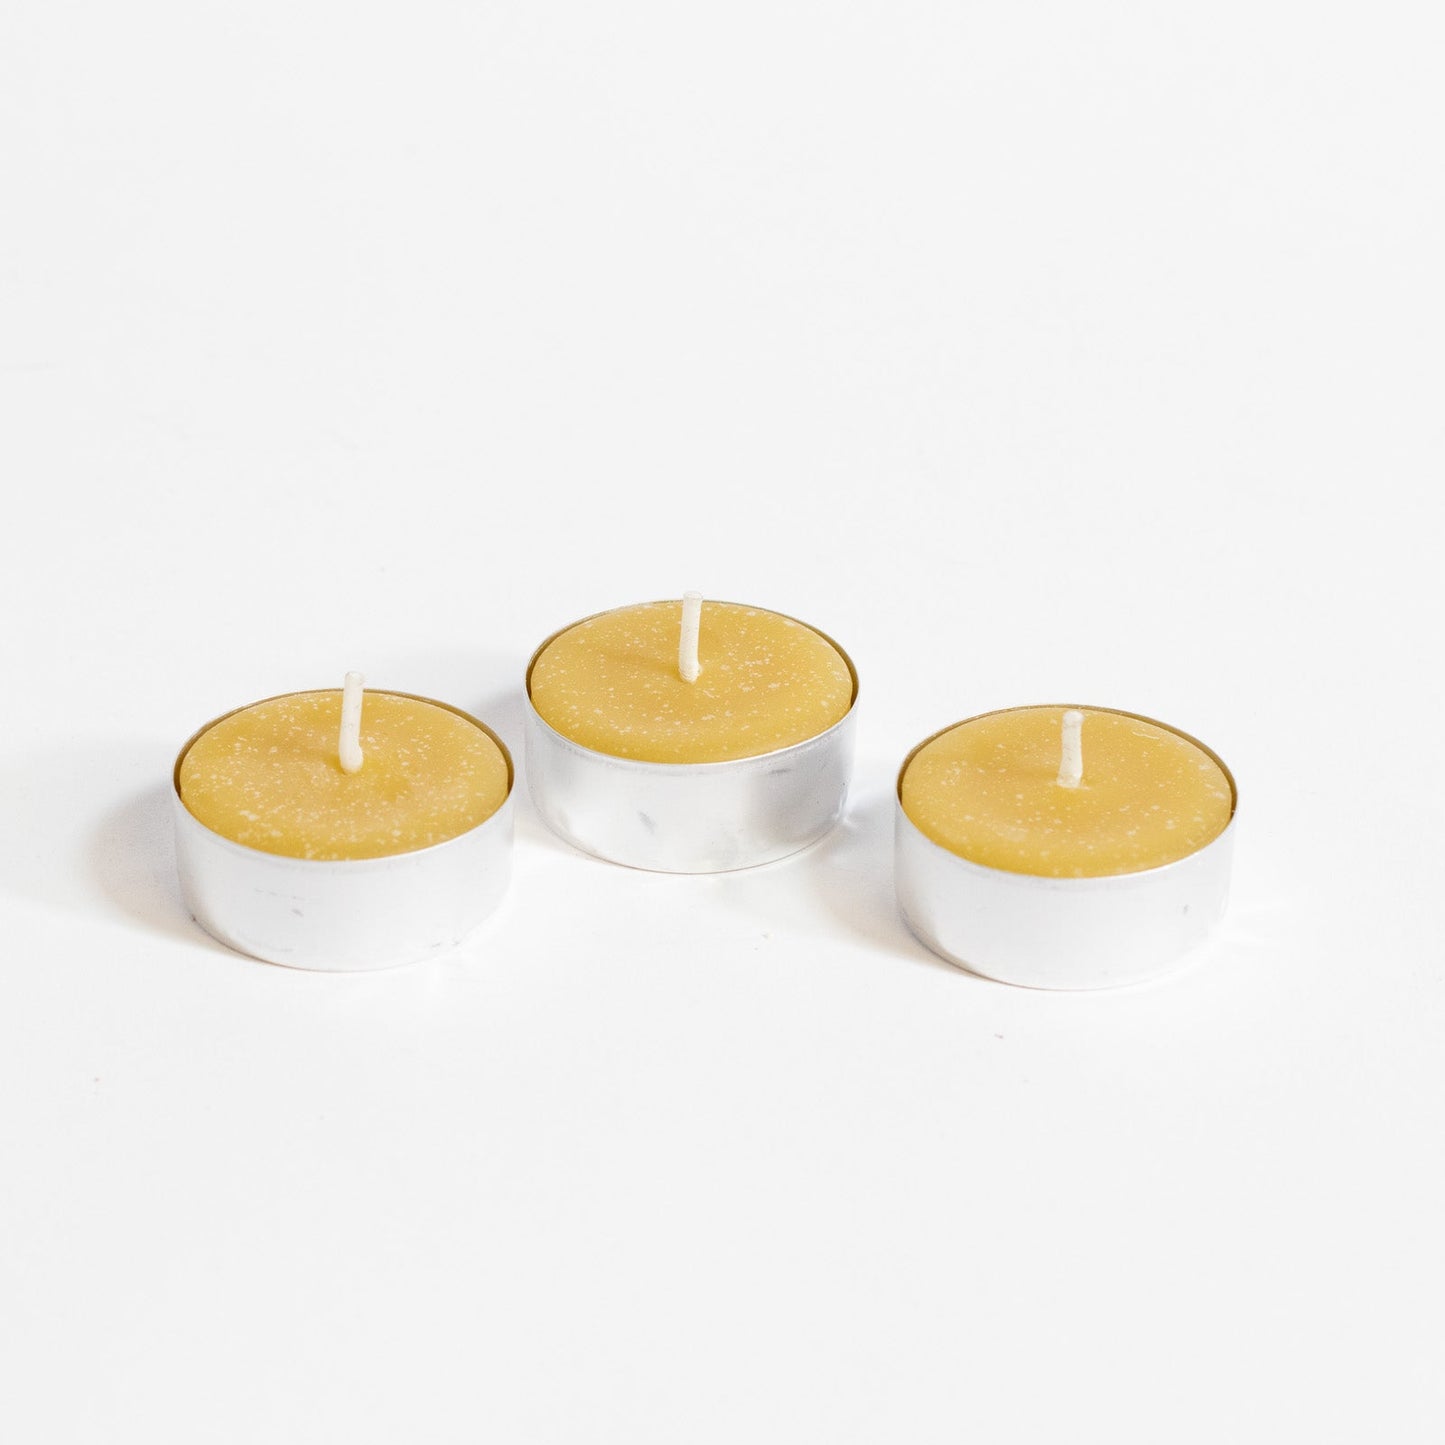 Beeswax Tealite Candle Sunbeam Candle 